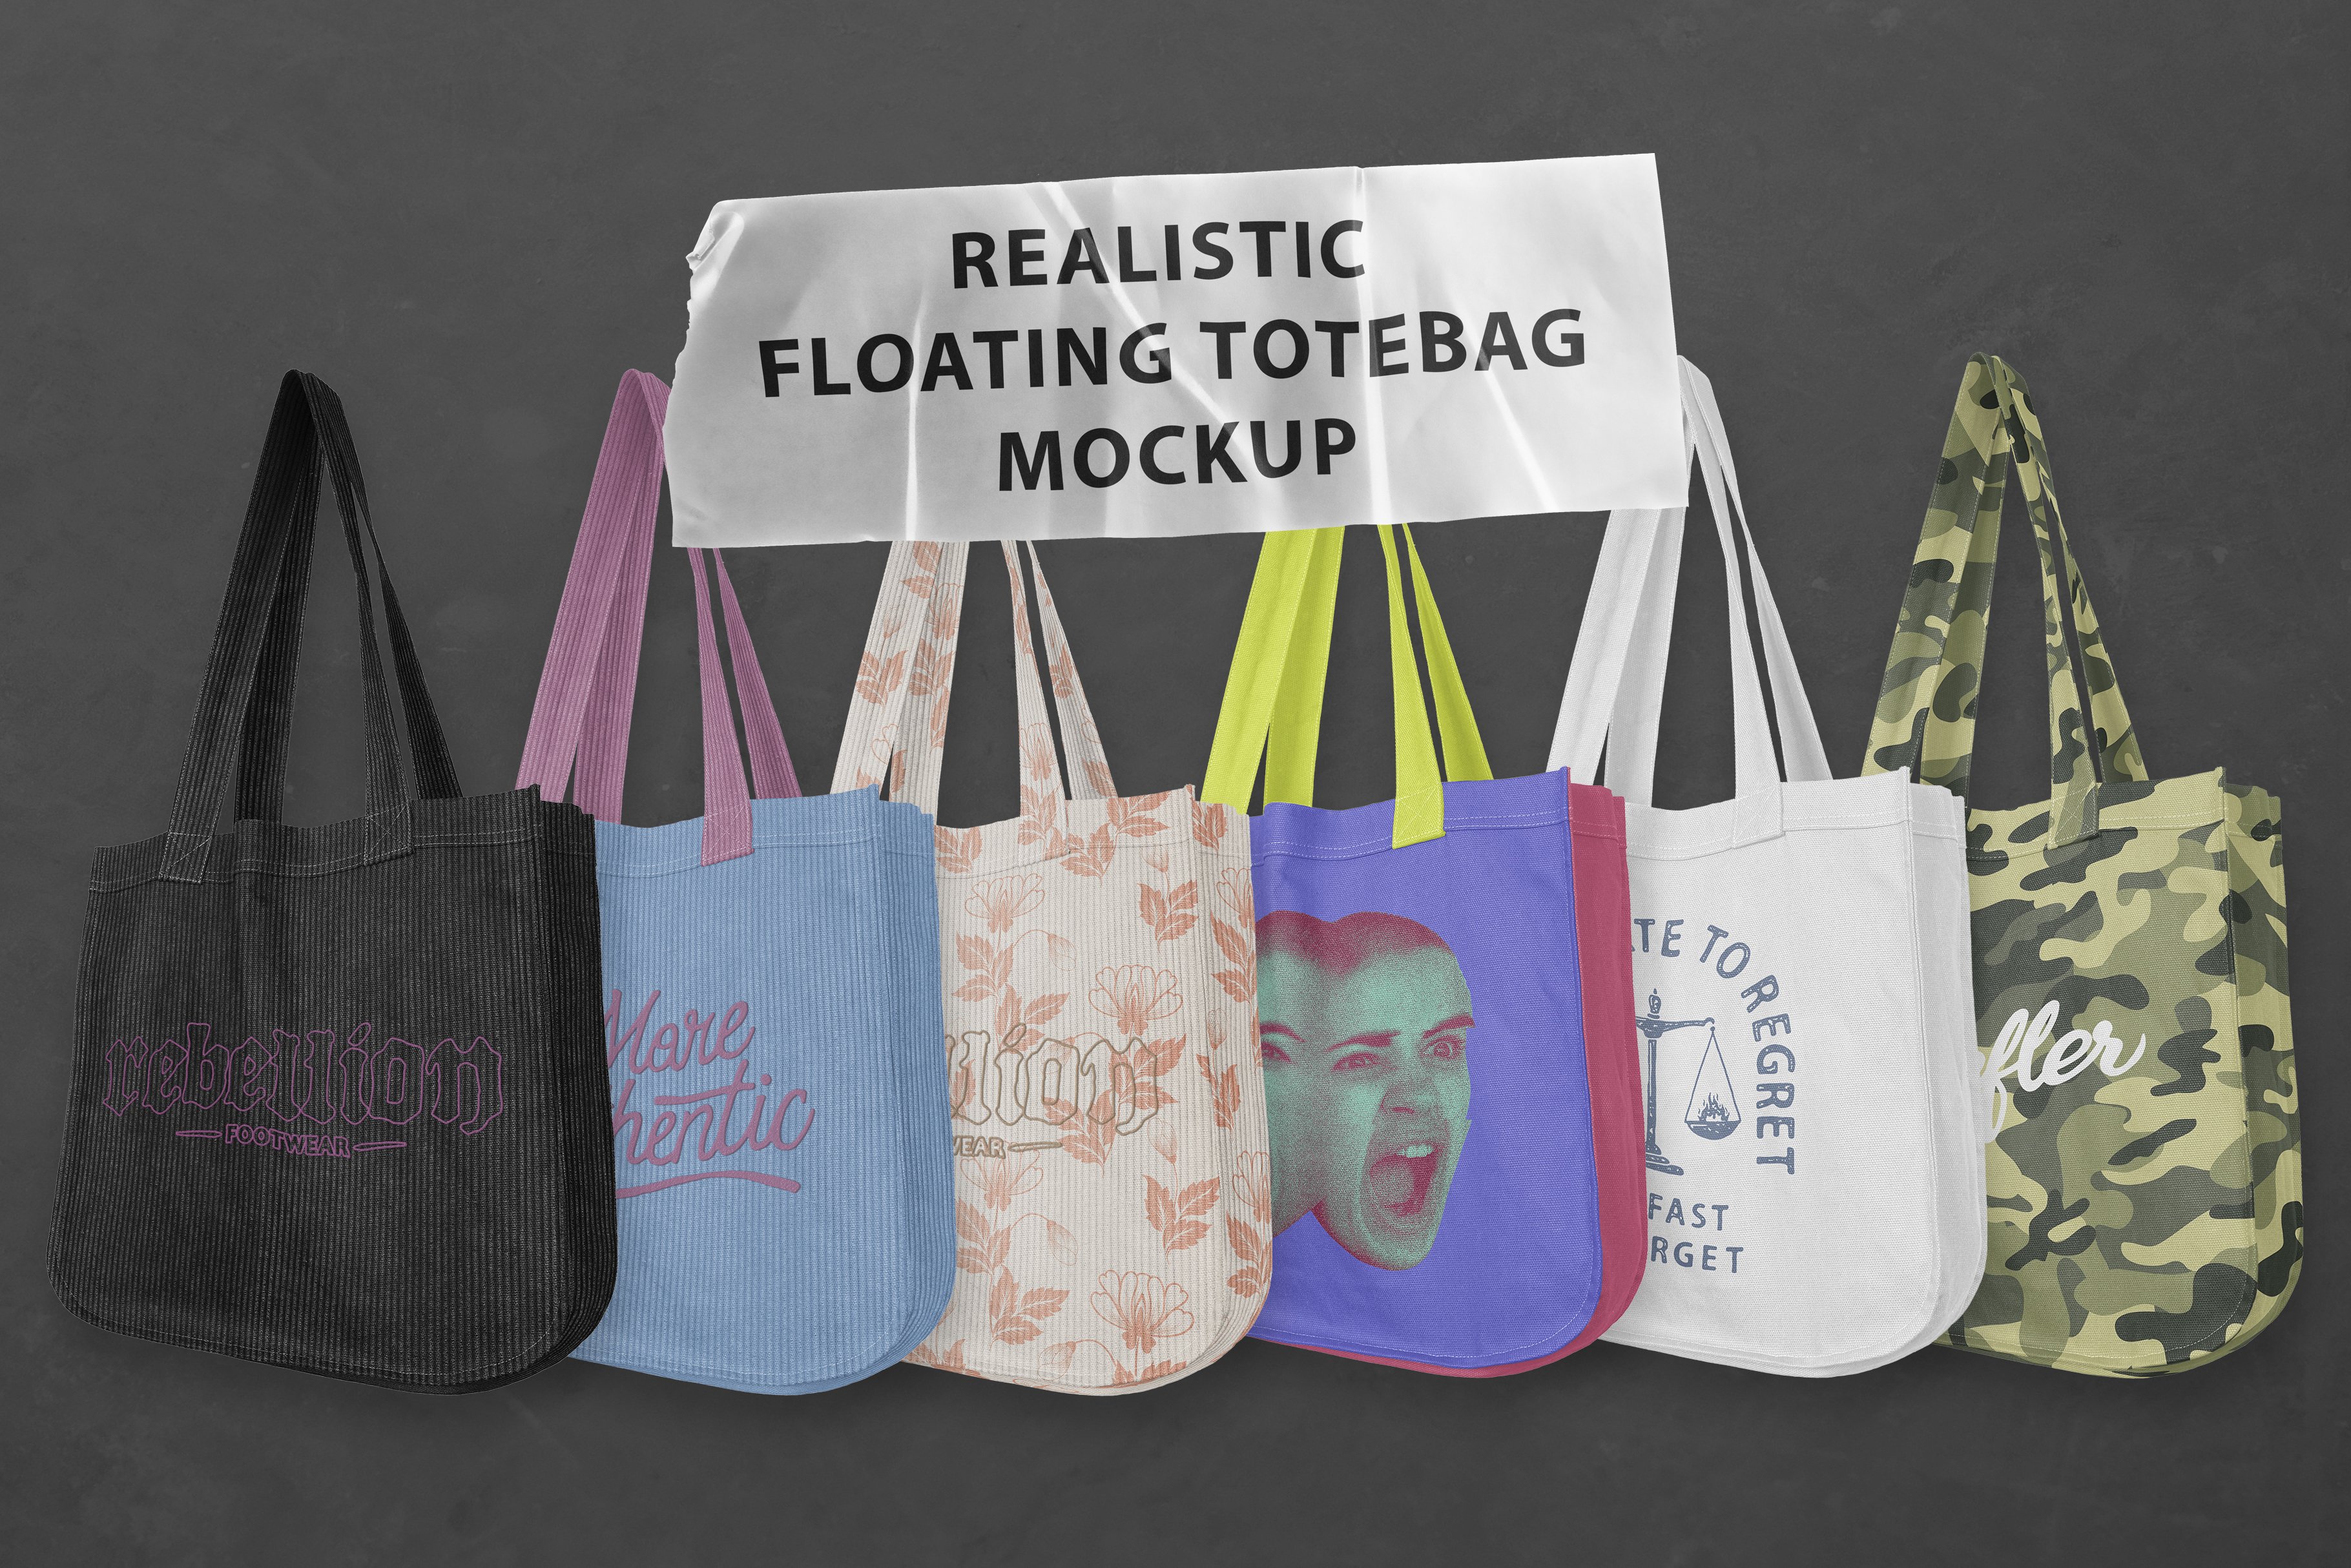 Realistic Floating Tote Bag Mockup cover image.